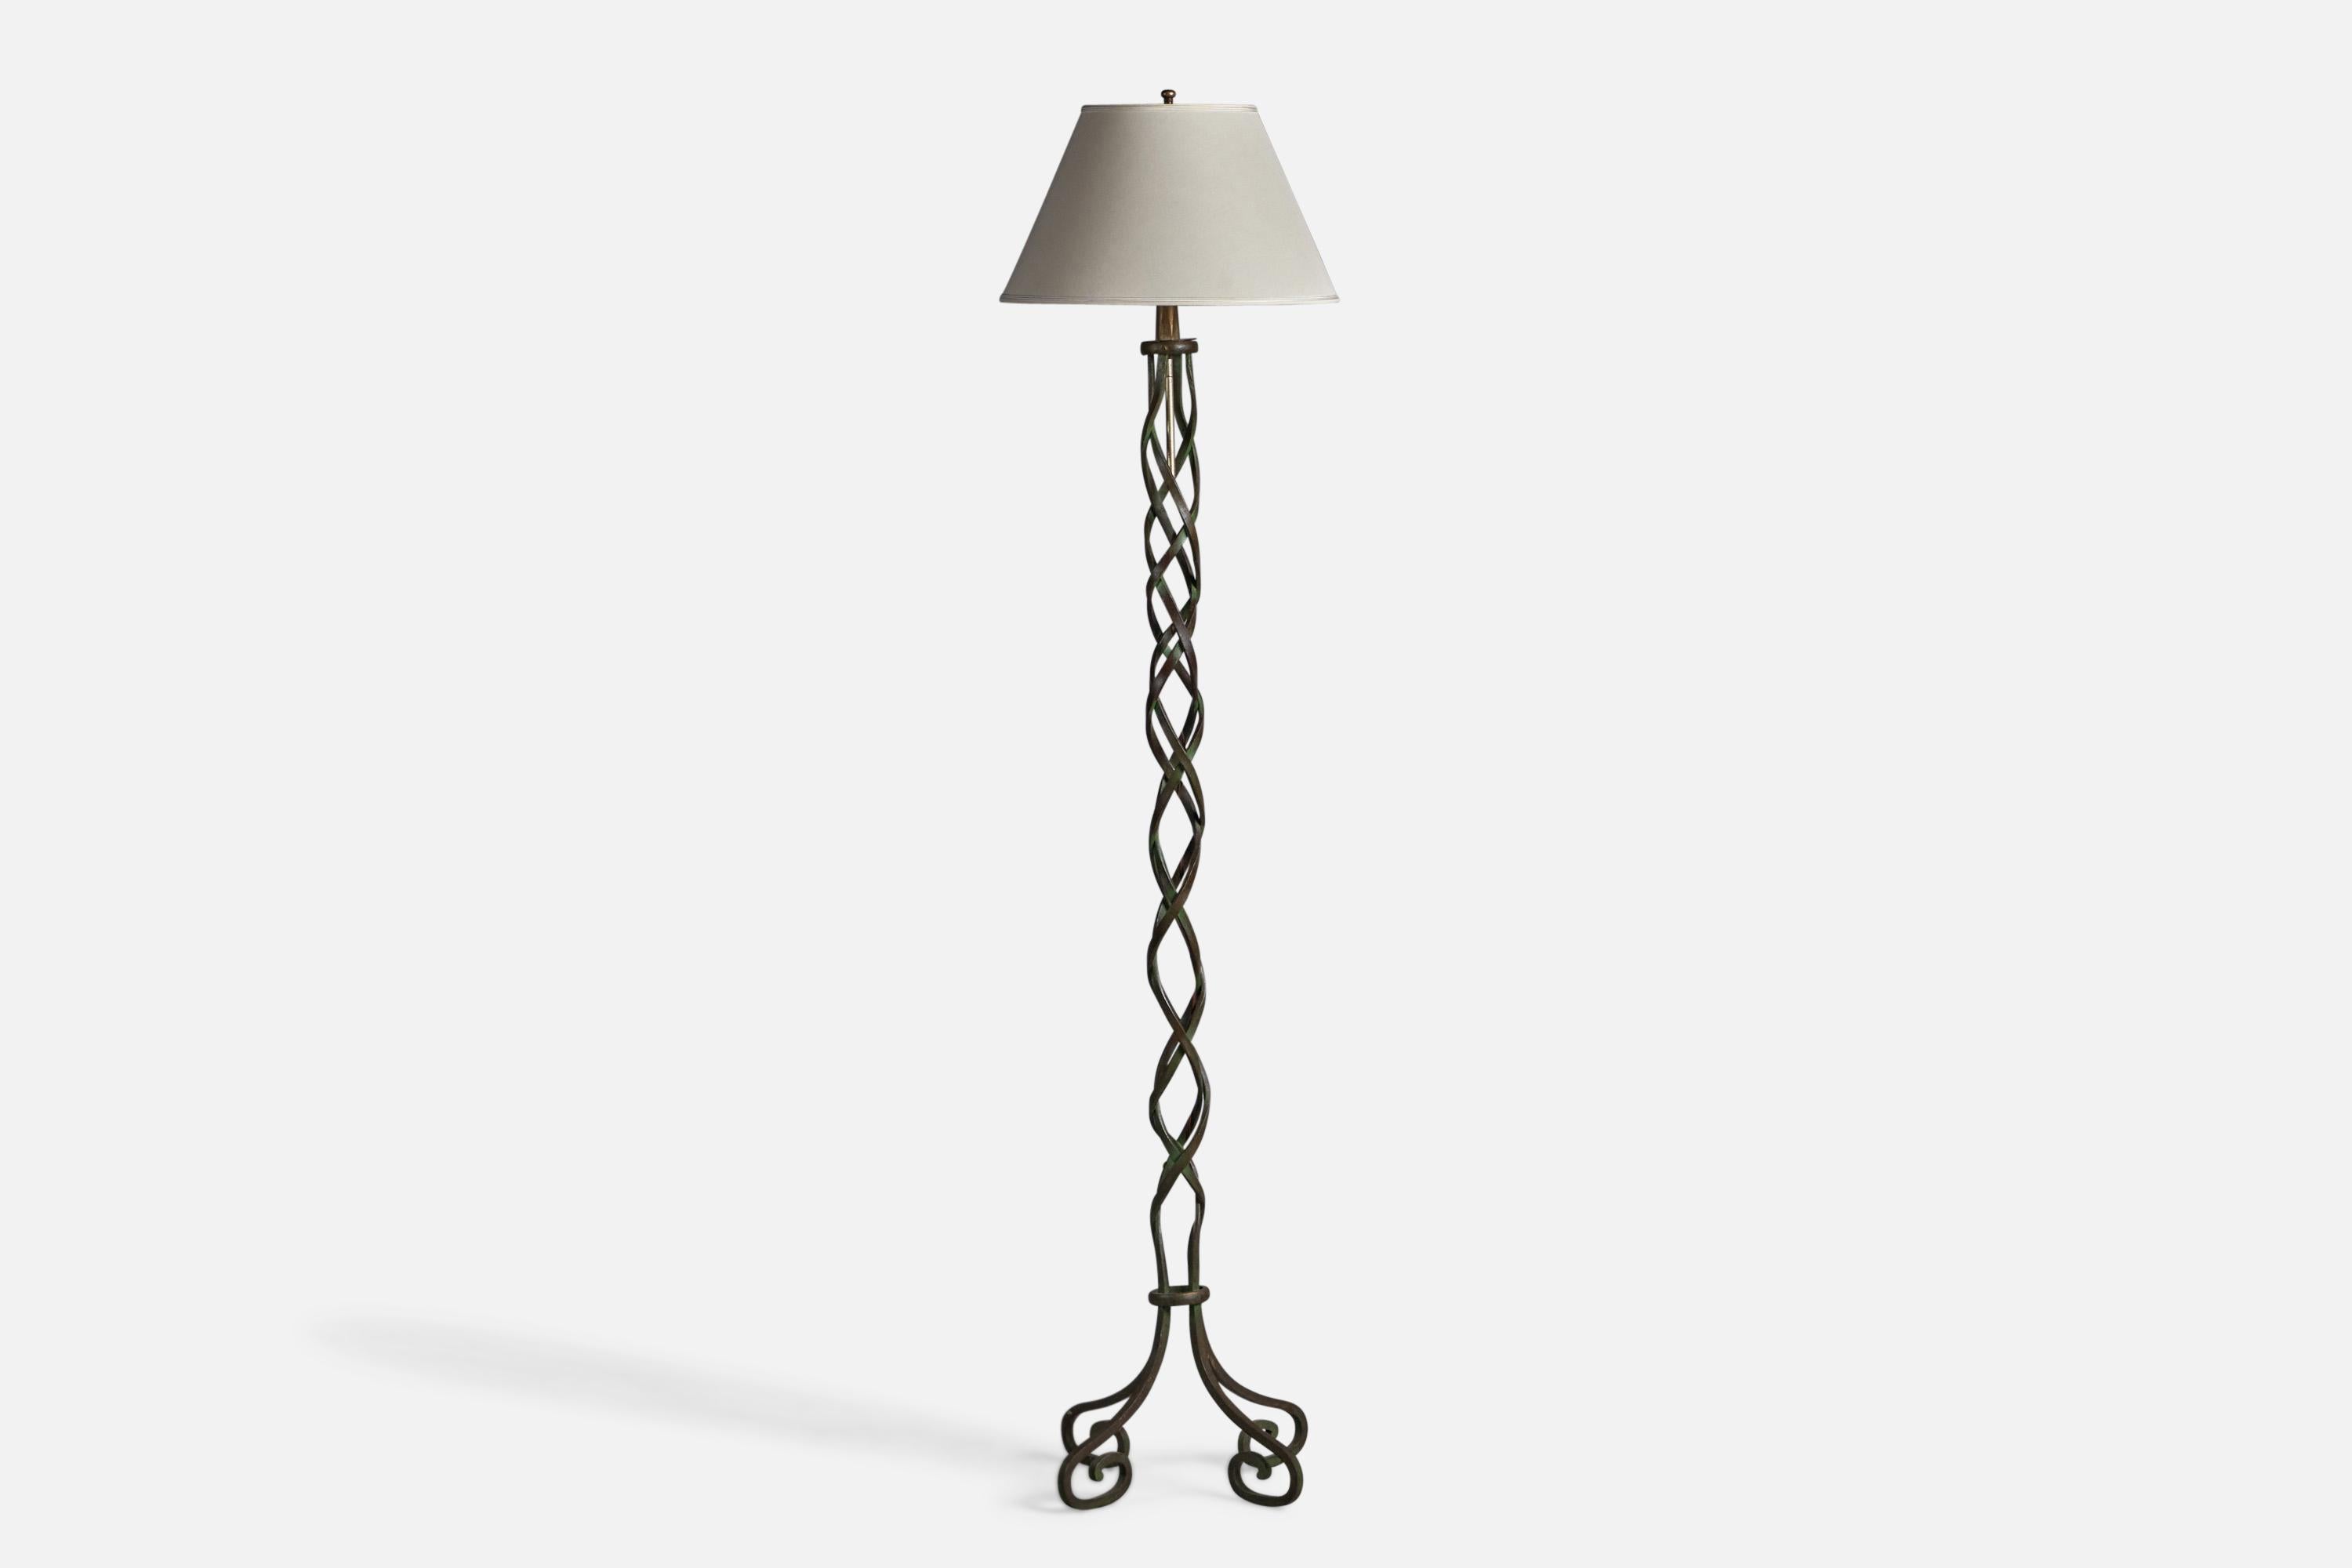 A black-painted iron and white fabric floor lamp, designed and produced in Italy, c. 1960s.

Overall Dimensions (inches): 66